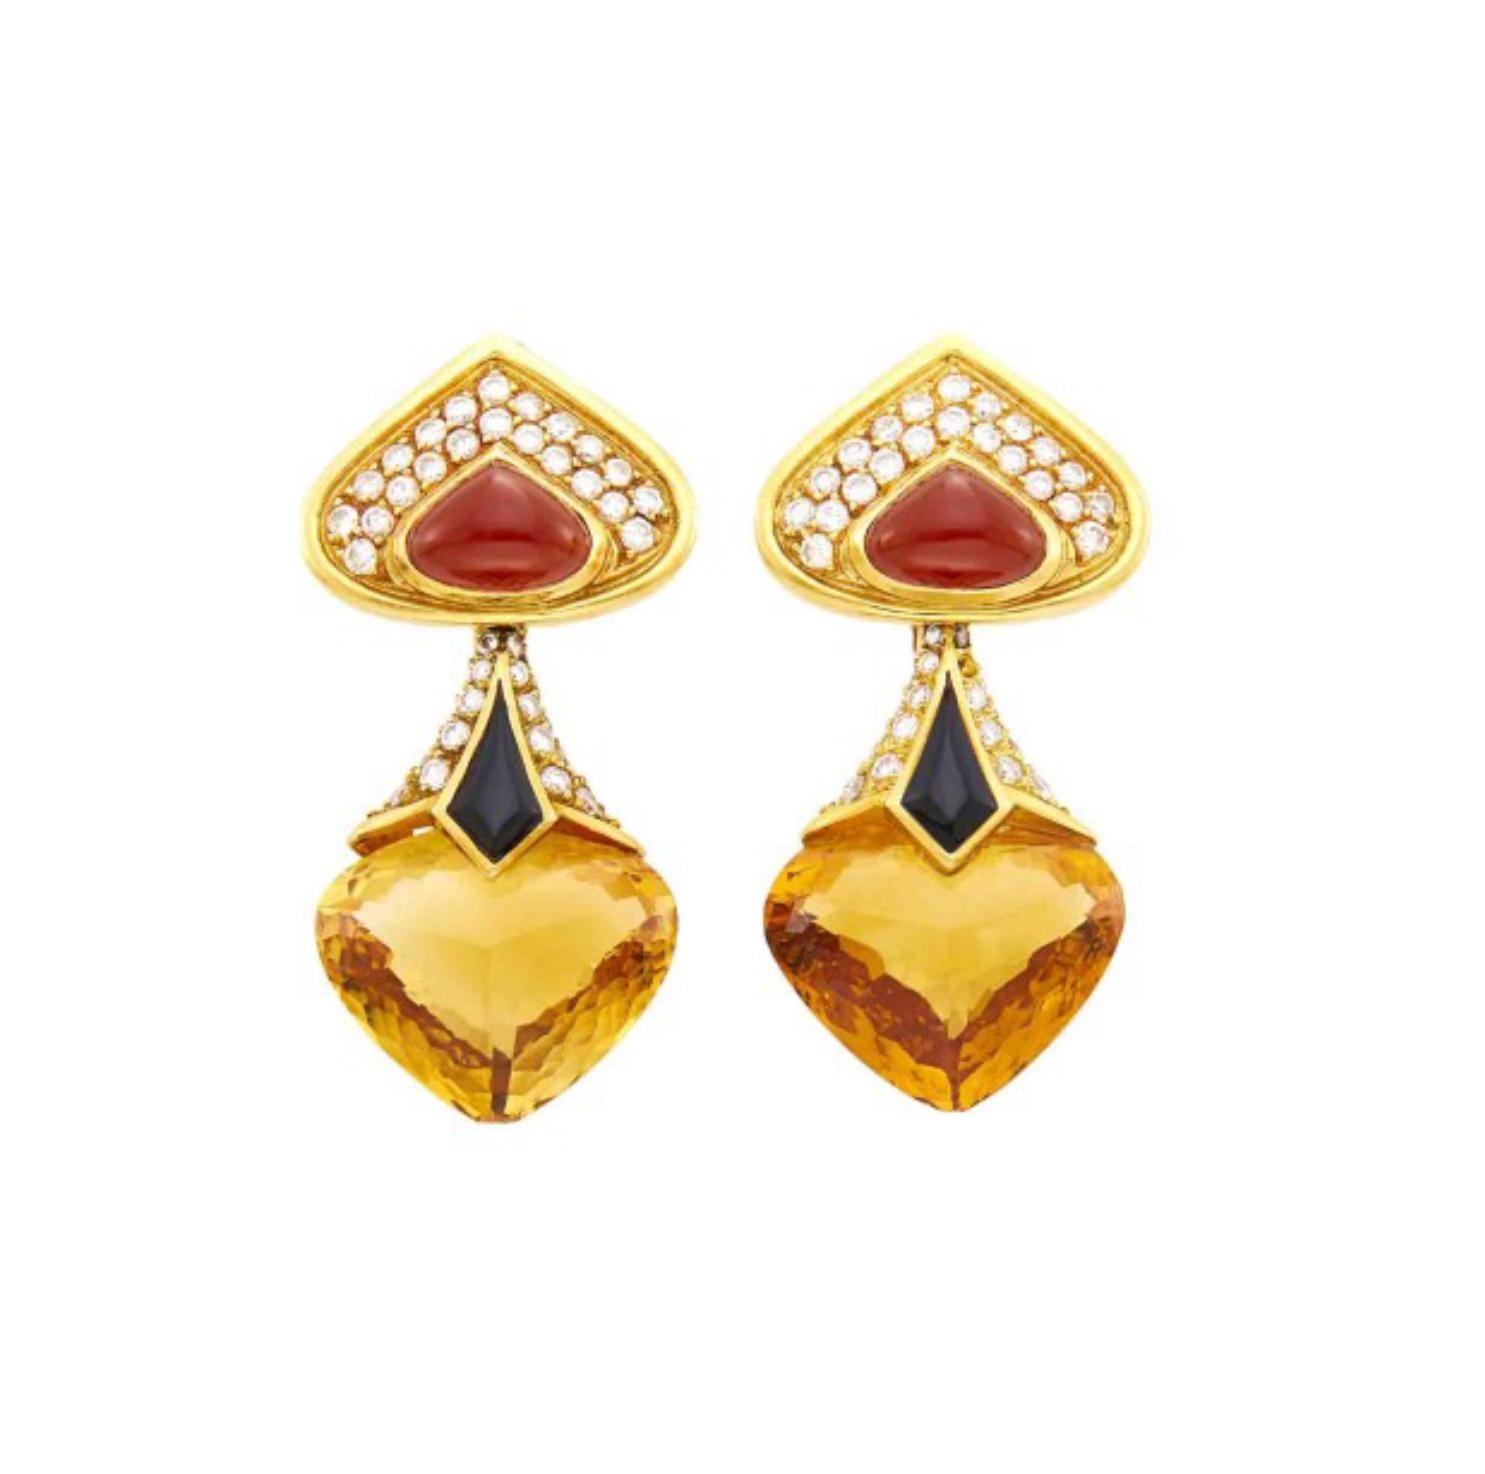 A beautiful pair of 18 karat yellow gold citrine earrings by Marina B, accented by diamonds, carnelian, and onyx. Approximately 22.90 carats of citrine and 1.75 carats of diamonds. Made in France, circa 1989. Measuring 1 5/8 x 13/16 inches.